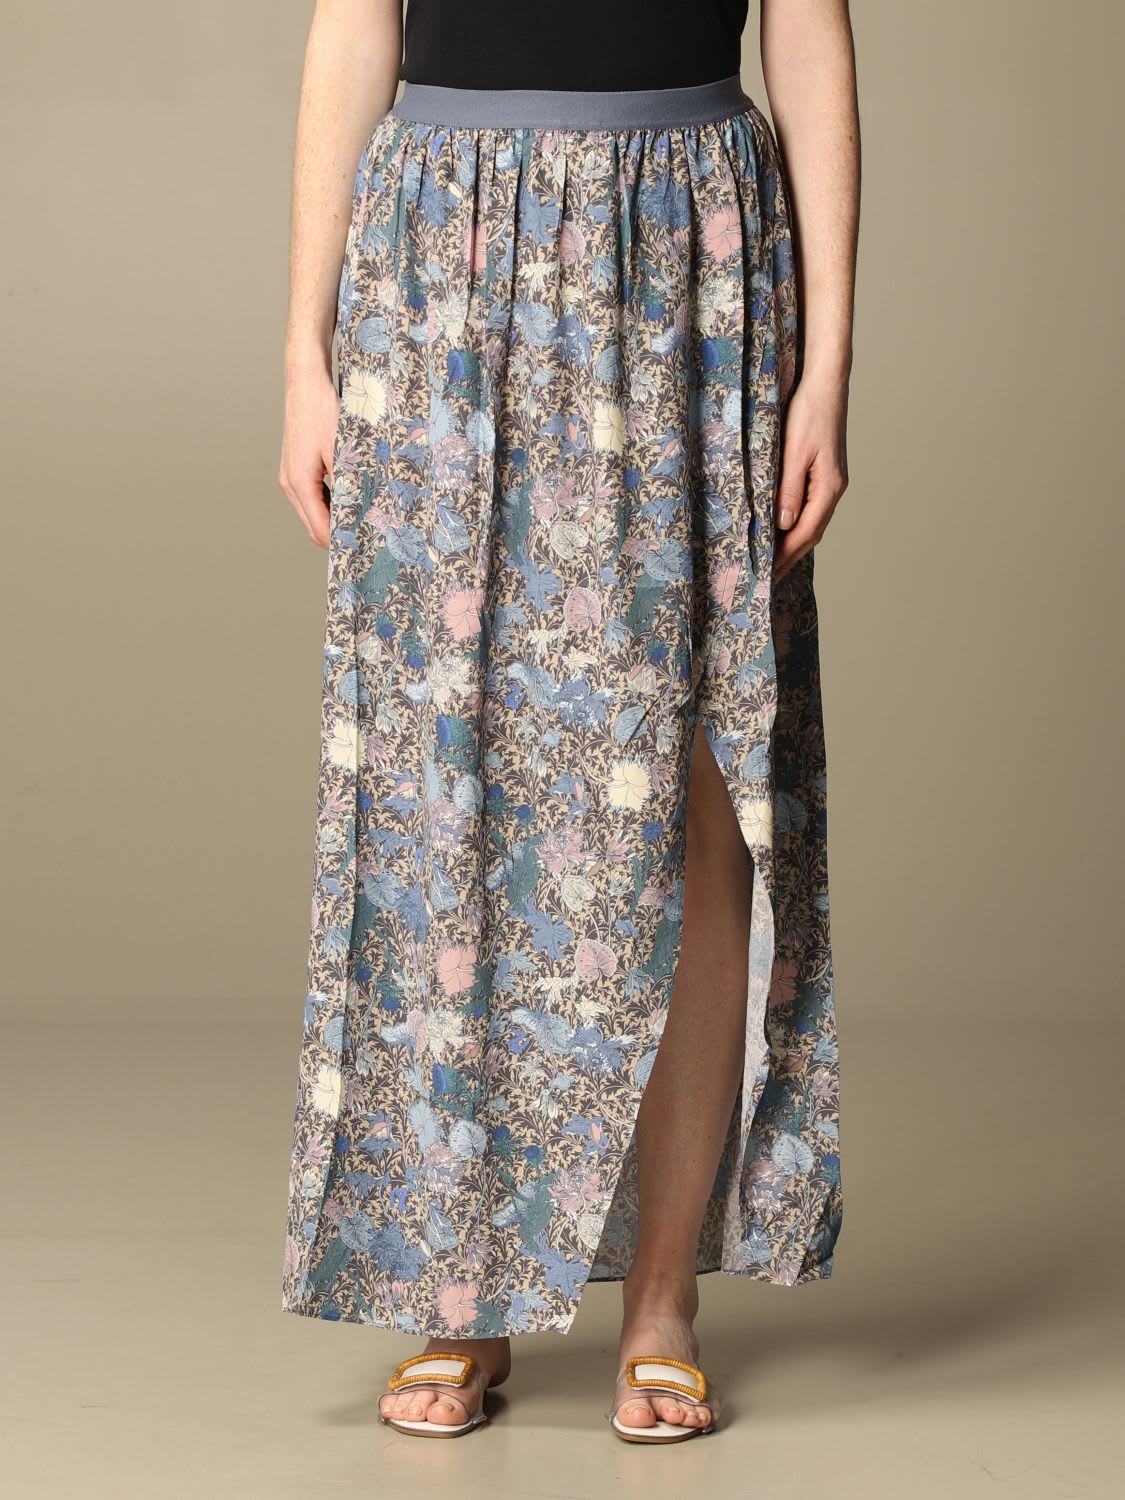 Zadig & Voltaire Skirt Zadig & Voltaire Long Skirt With Floral Pattern